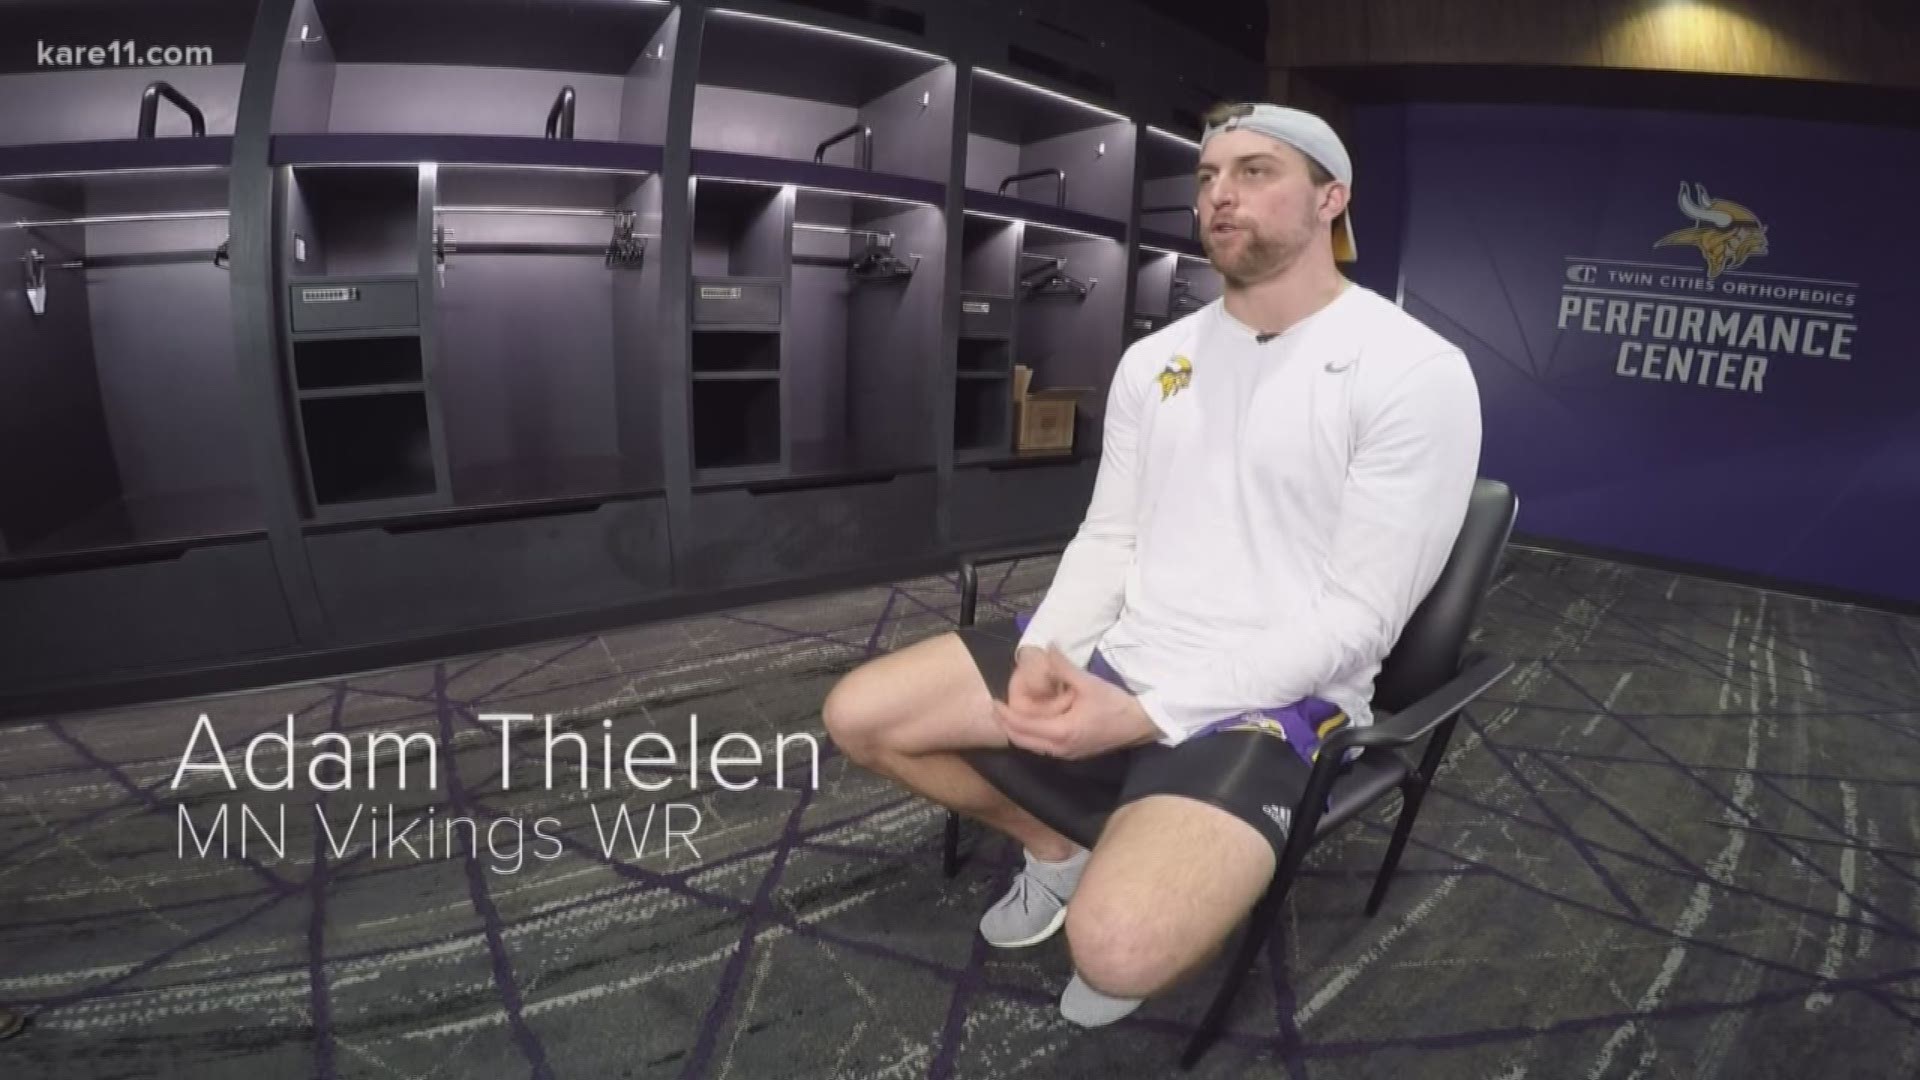 We sat down with Vikings wide receiver Adam Thielen for his best advice as we start a new week.